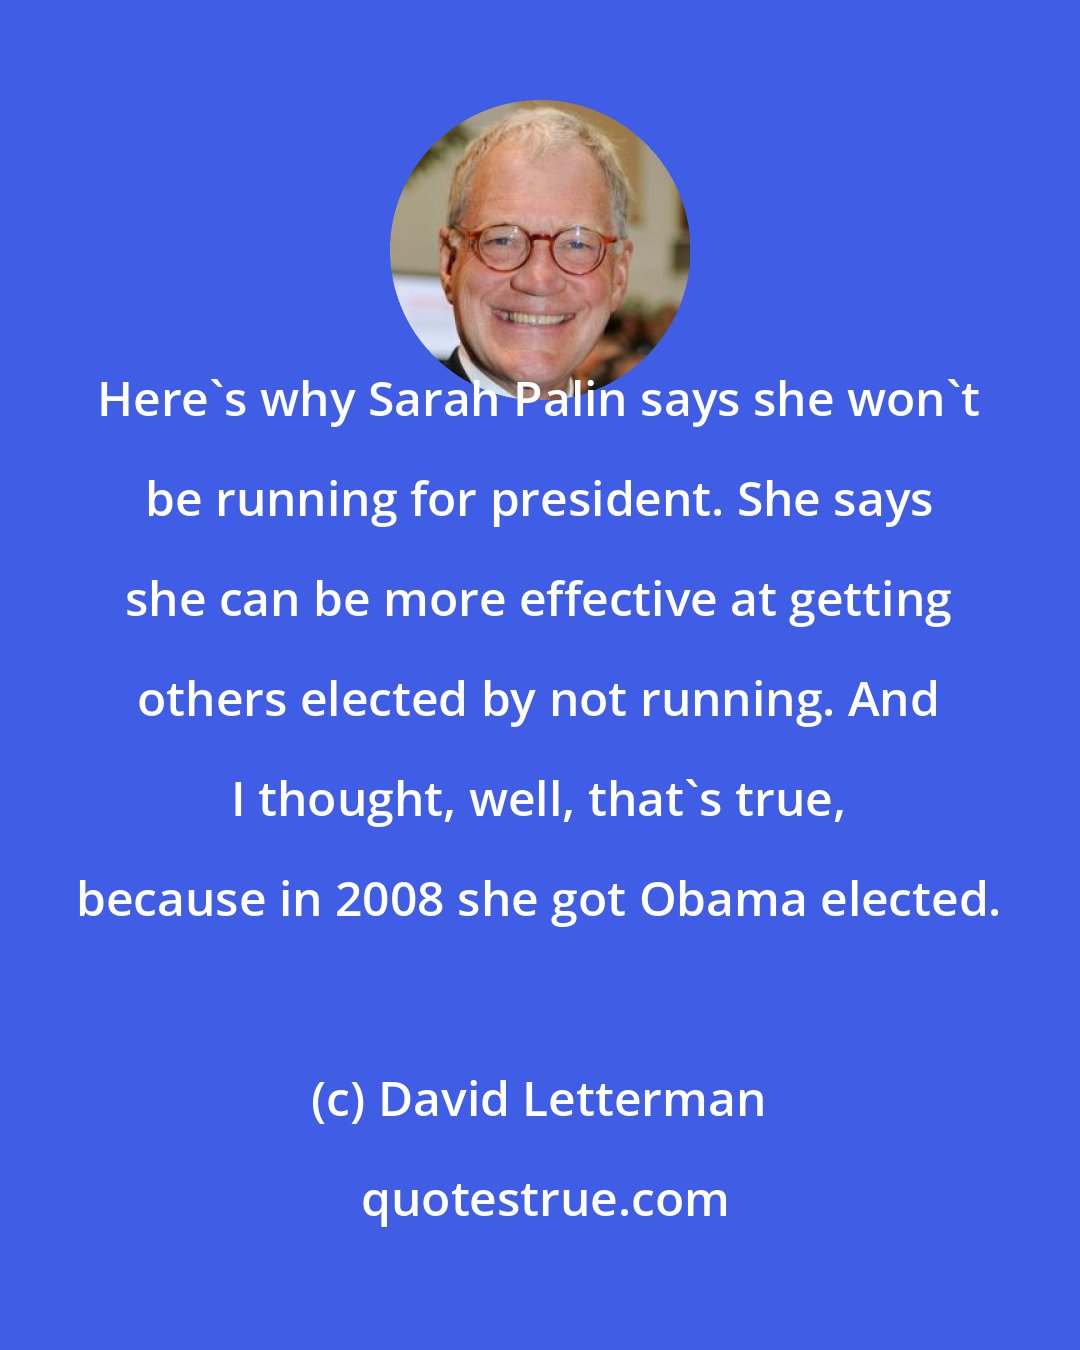 David Letterman: Here's why Sarah Palin says she won't be running for president. She says she can be more effective at getting others elected by not running. And I thought, well, that's true, because in 2008 she got Obama elected.